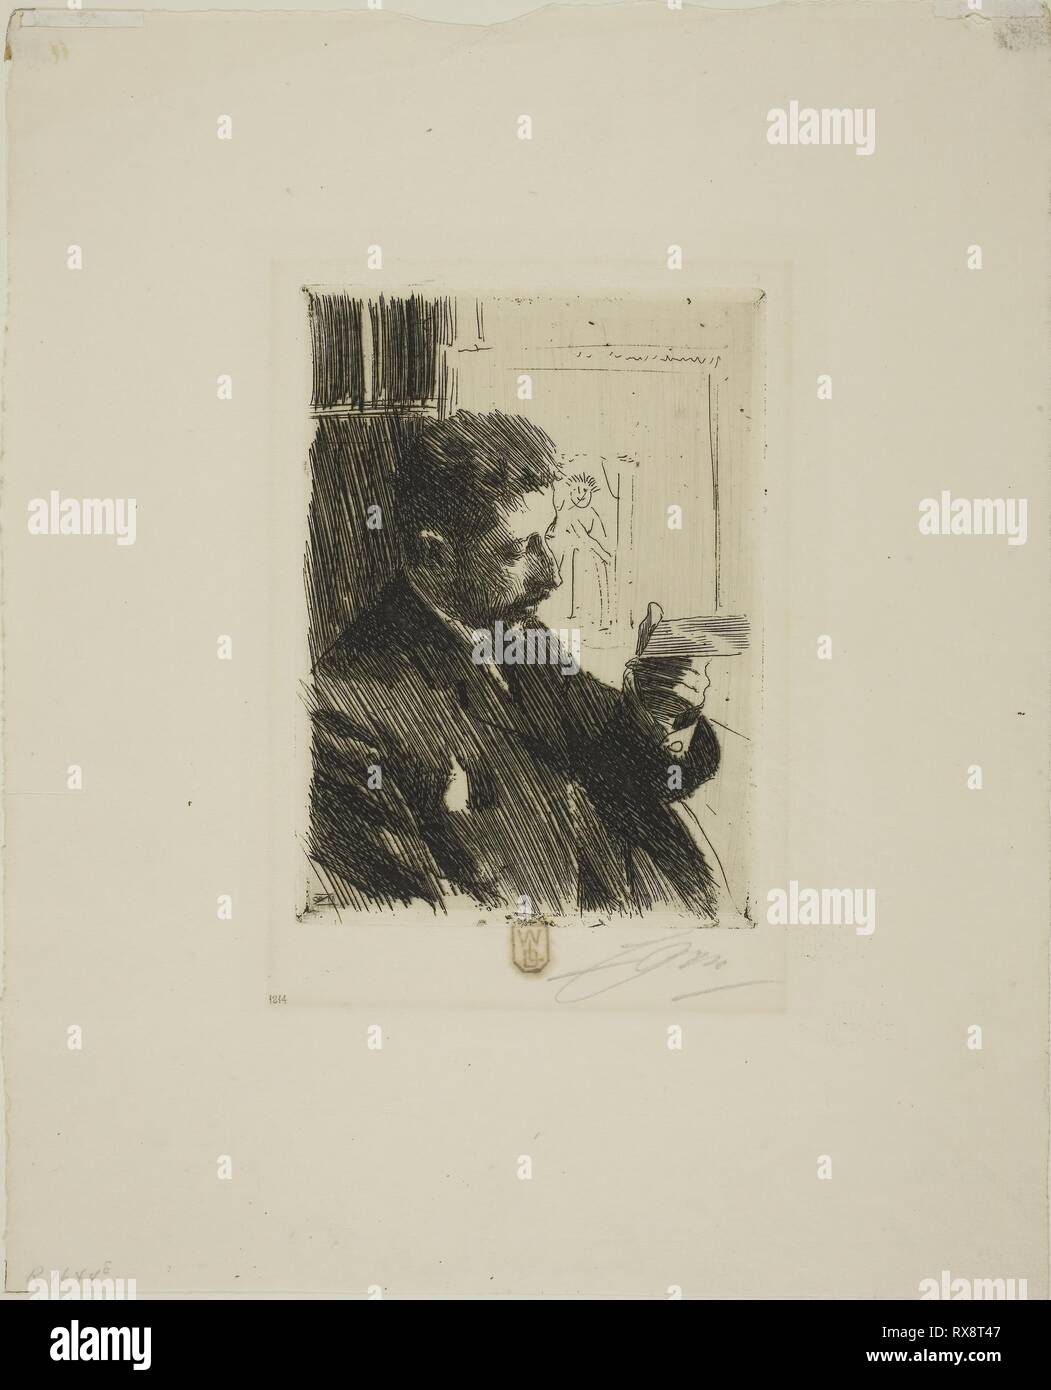 H. R. H. Prince Eugen of Sweden. Anders Zorn; Swedish, 1860-1920. Date: 1891. Dimensions: 134 x 96 mm (image); 139 x 101 mm (plate); 282 x 228 mm (sheet). Etching on ivory laid paper. Origin: Sweden. Museum: The Chicago Art Institute. Stock Photo